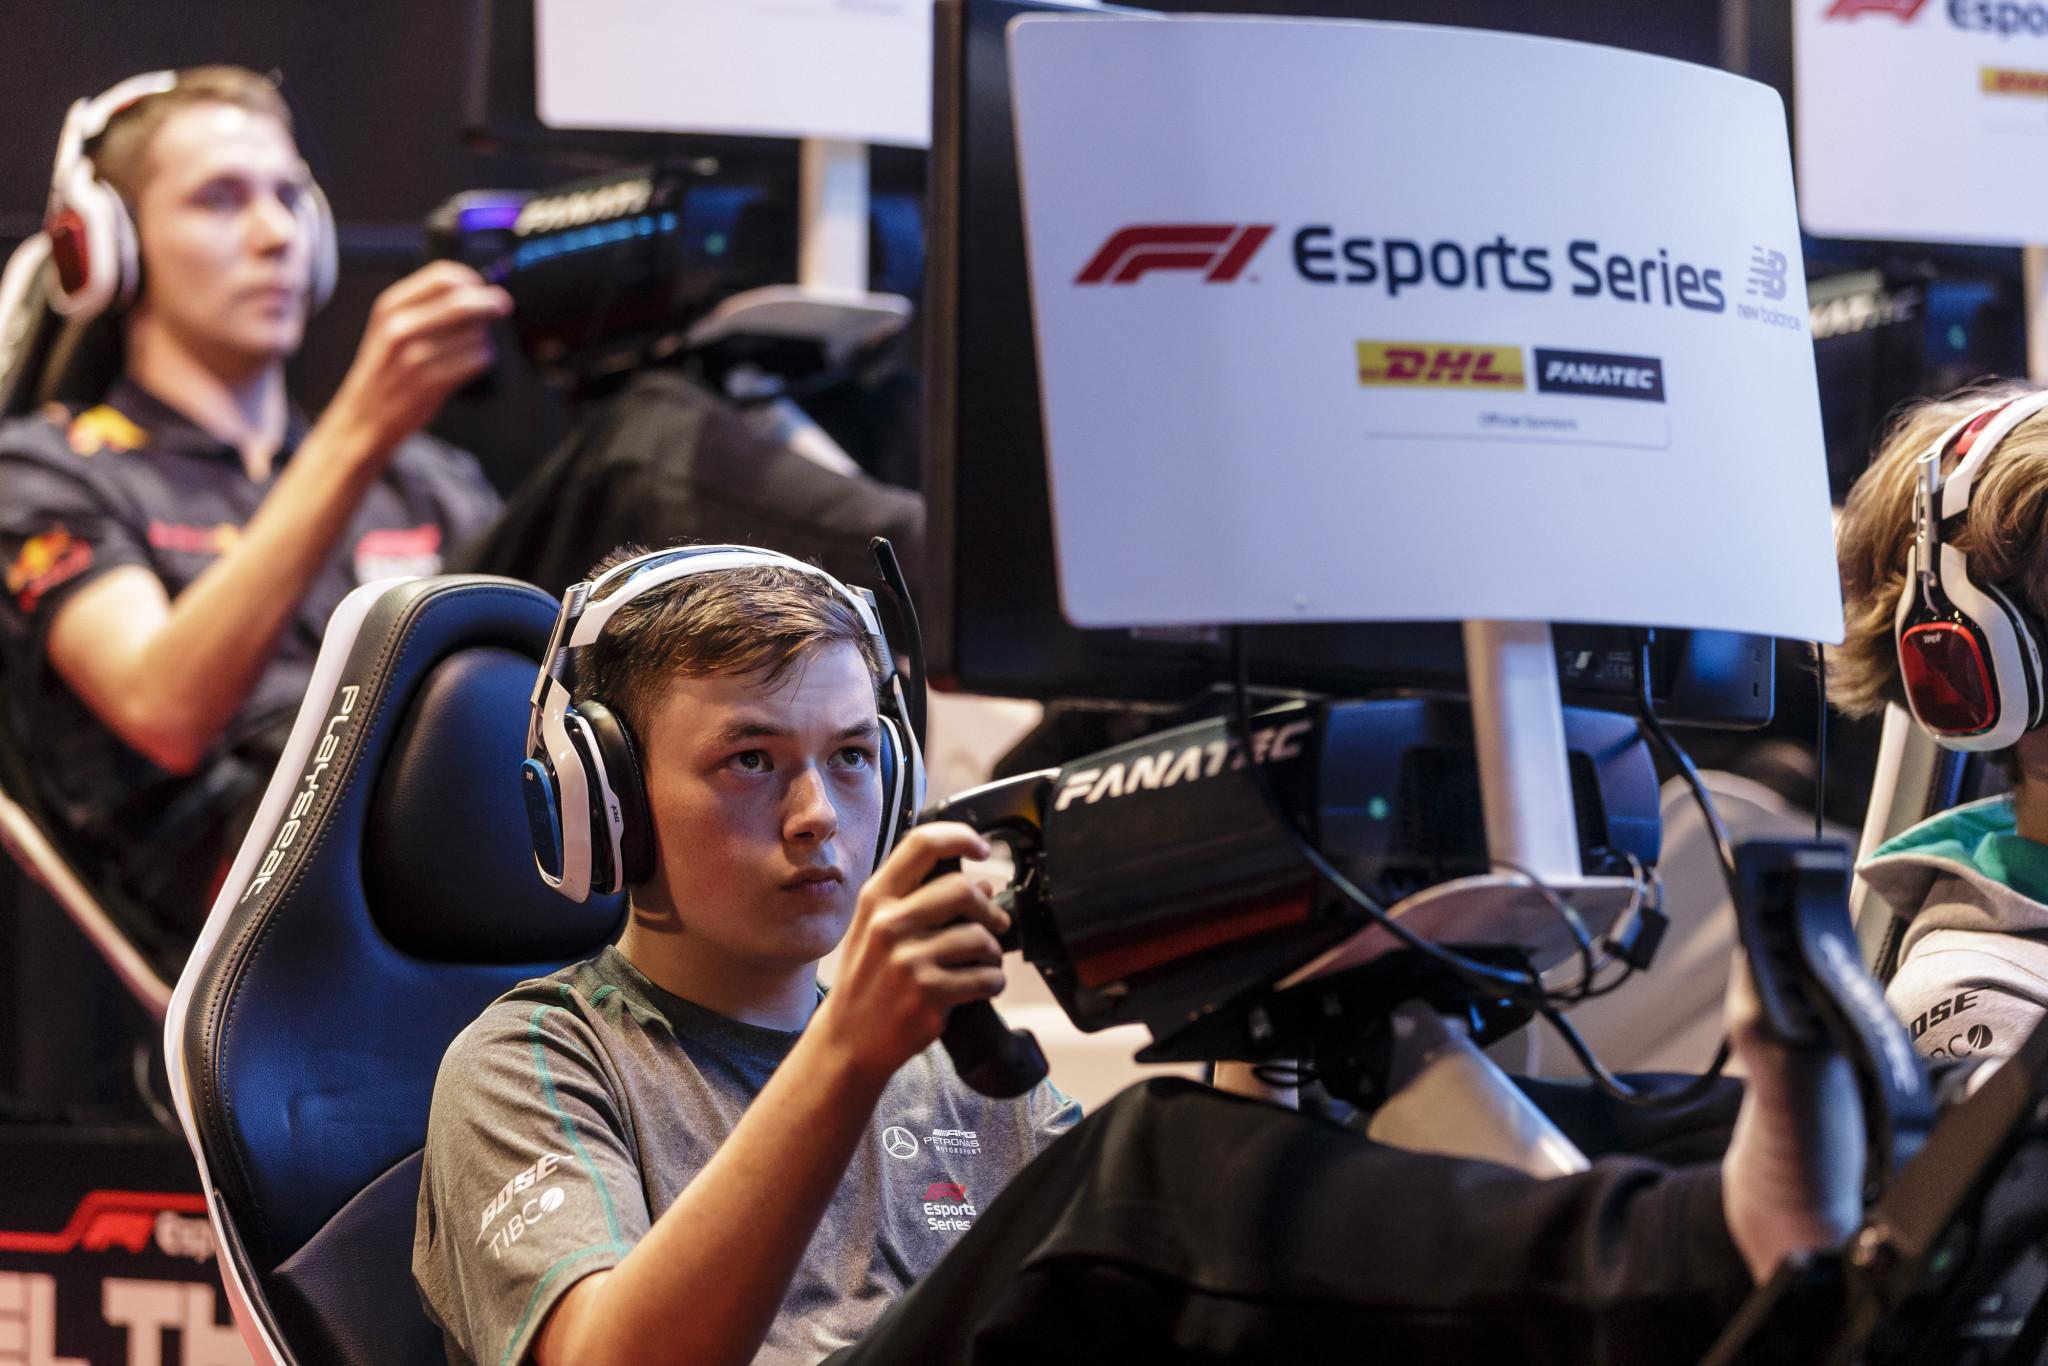 The F1 Esports Series Pro Championship has returned ©Getty Images